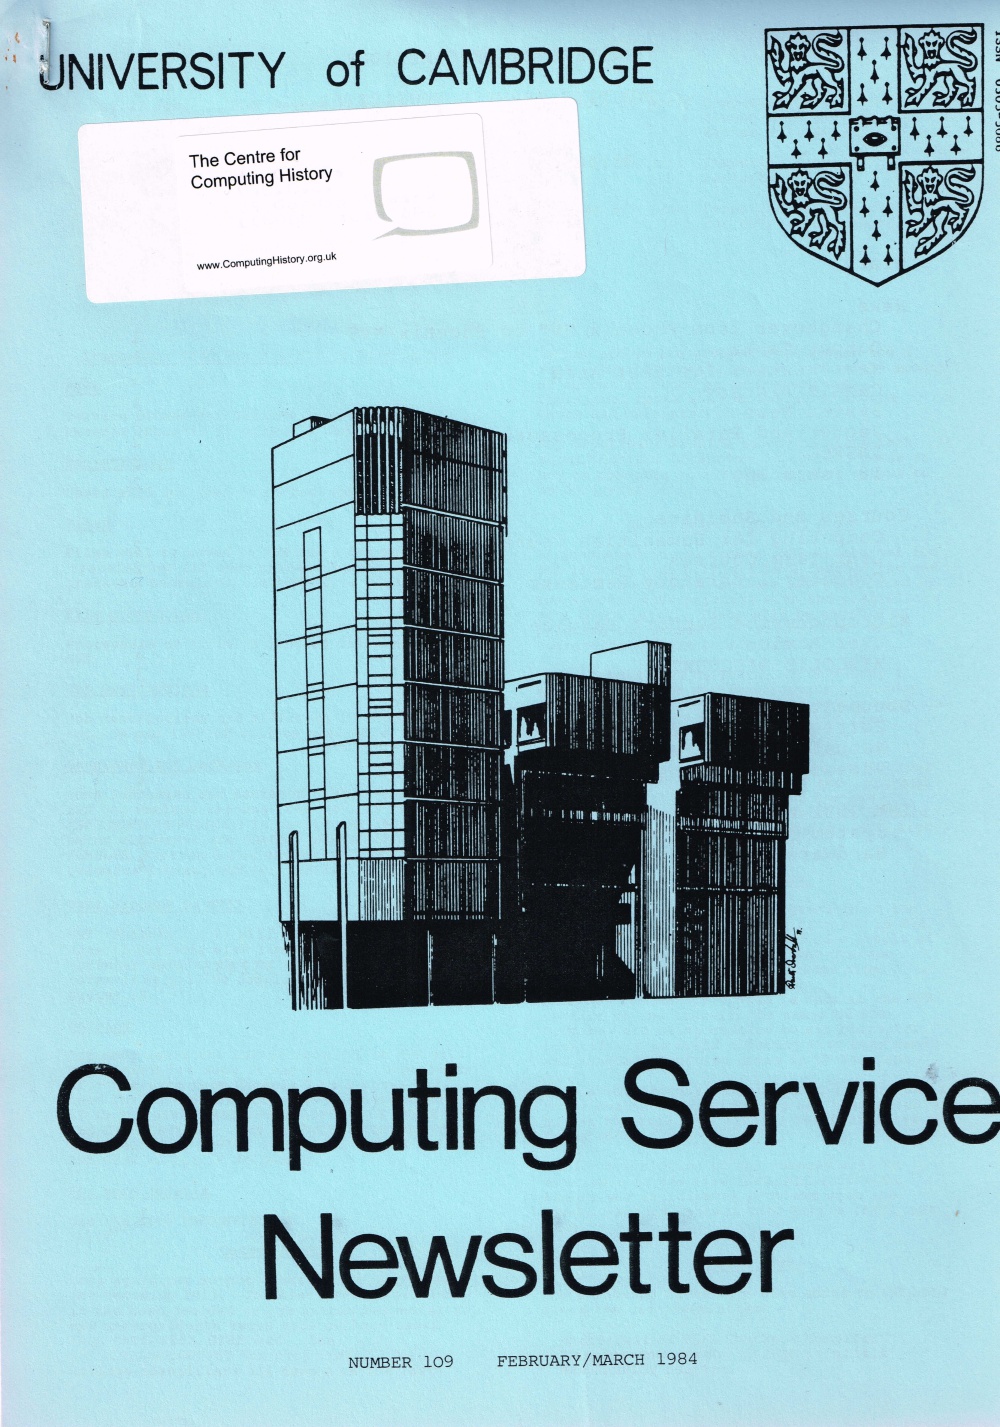 Article: University of Cambridge Computing Service February/March 1984 Newsletter 109